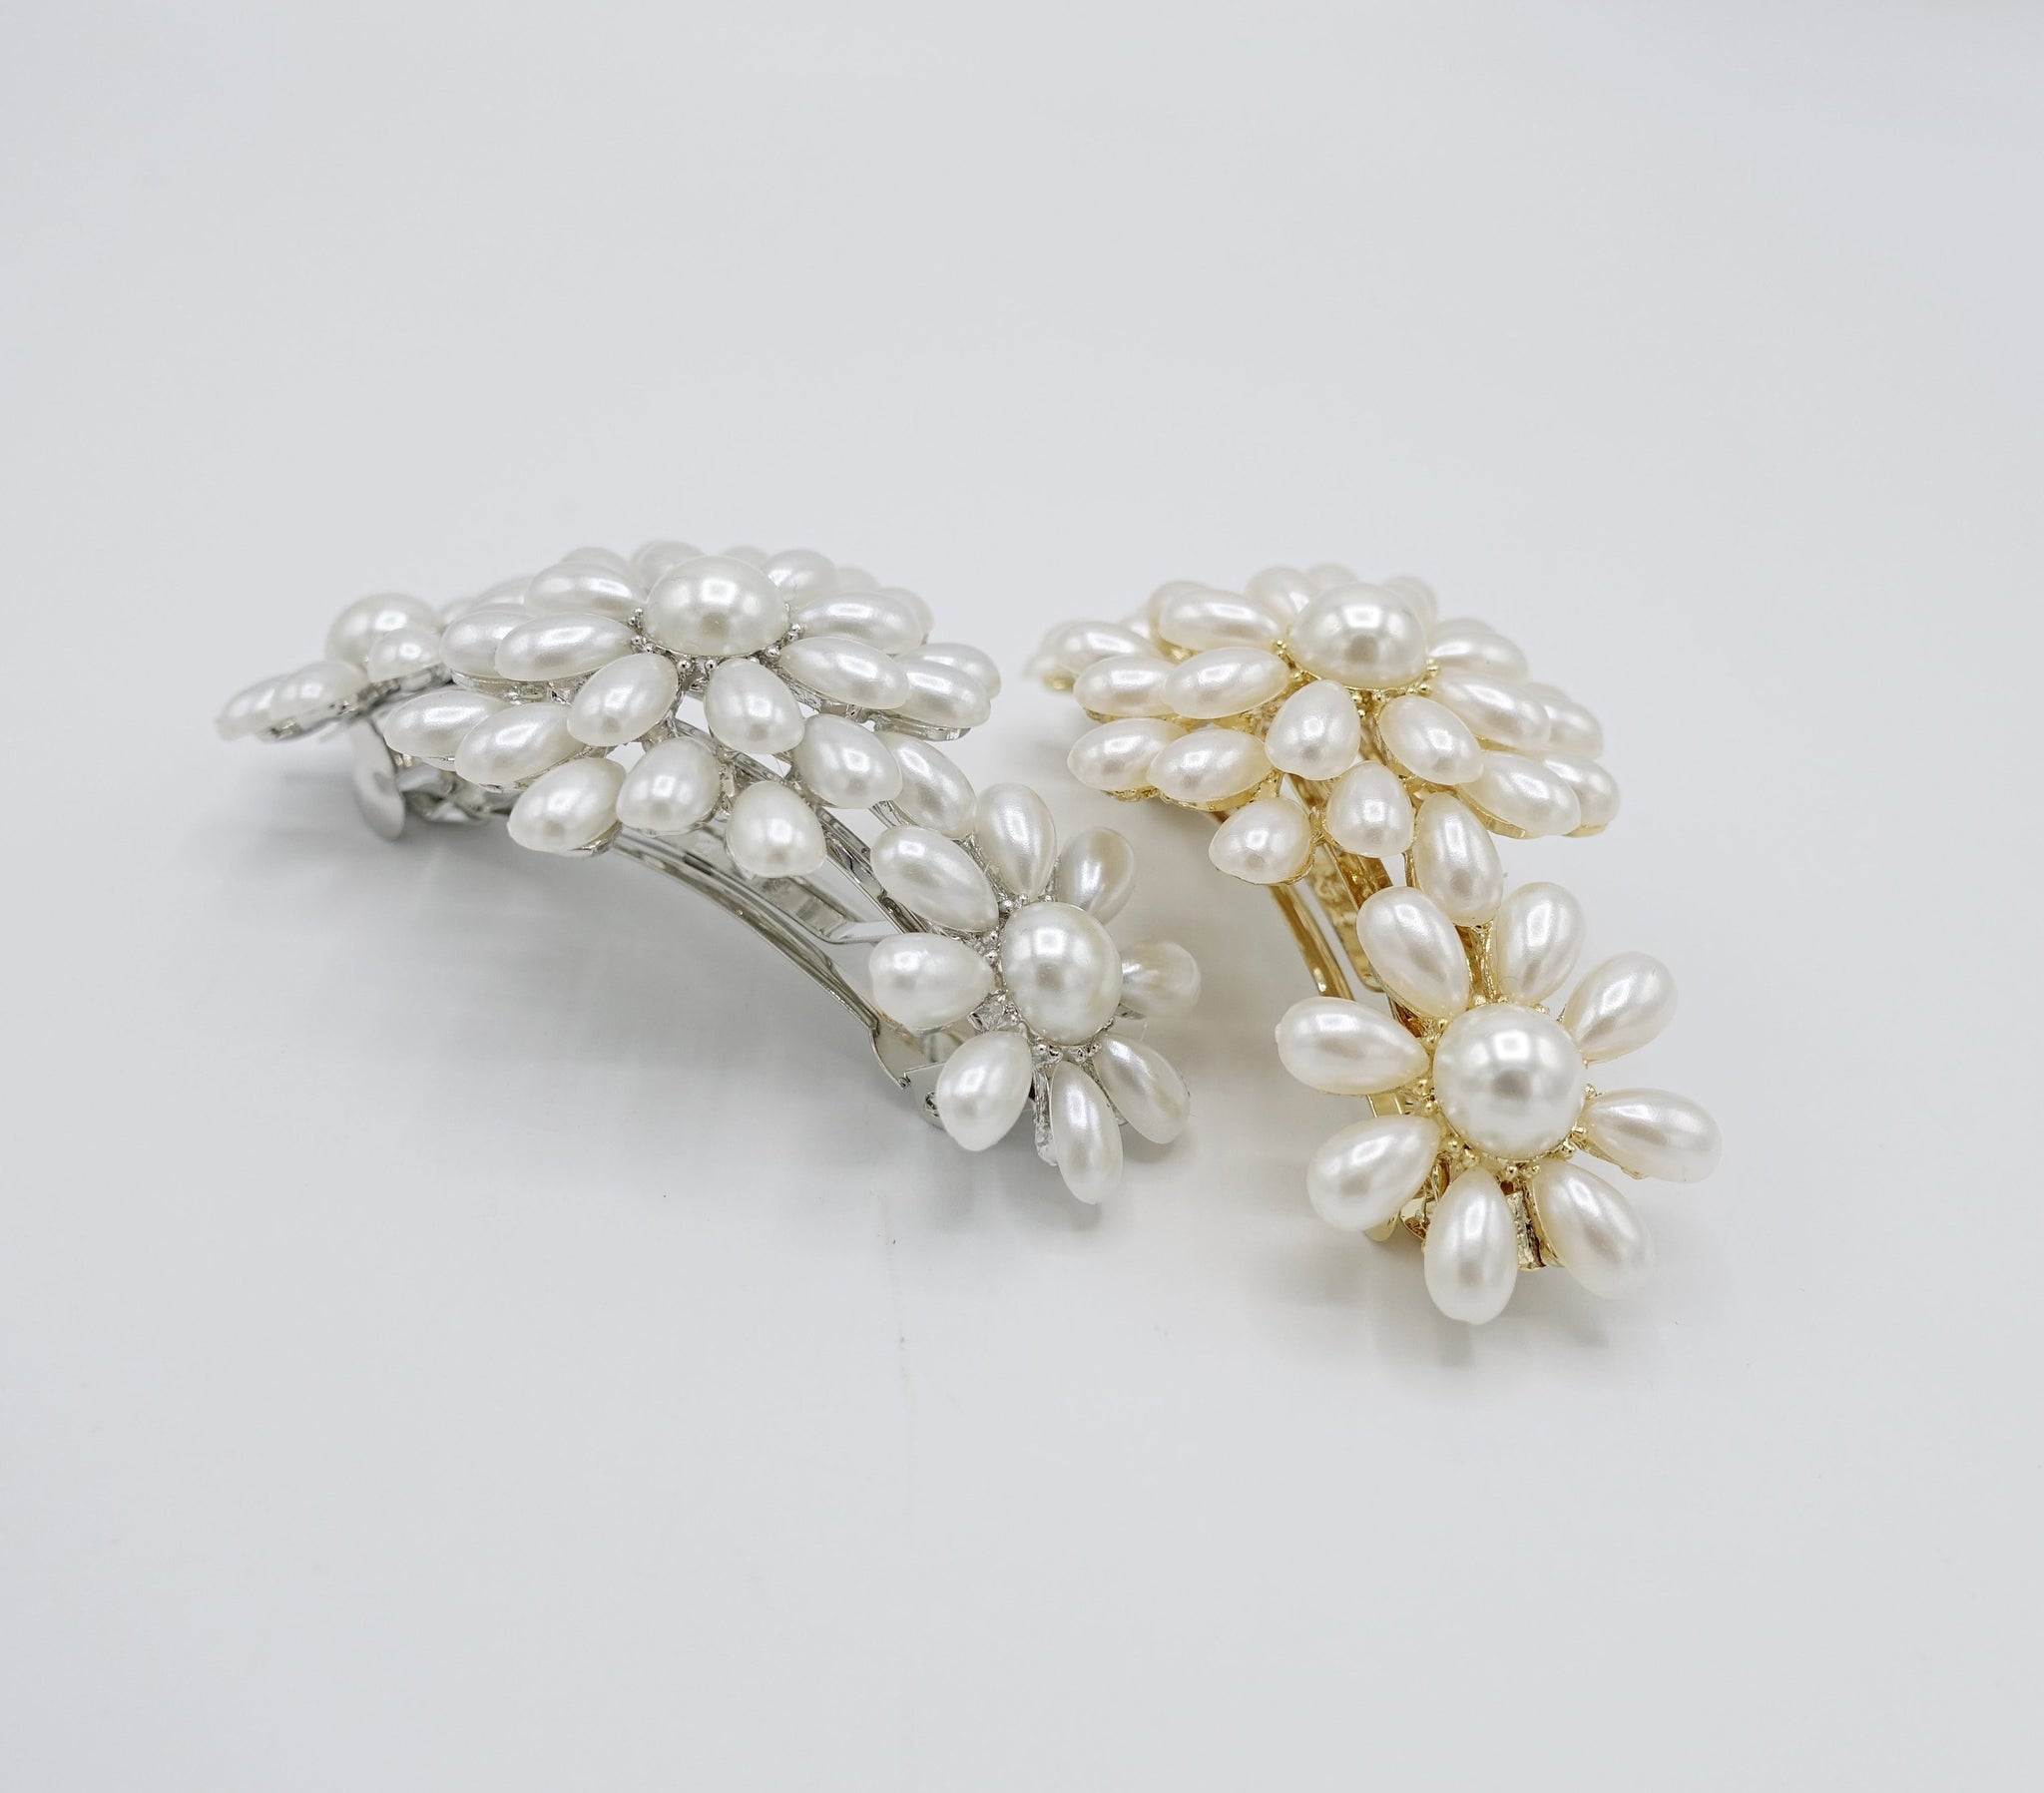 VeryShine claw/banana/barrette pearl flower embellished french hair barrette hair accessory for women